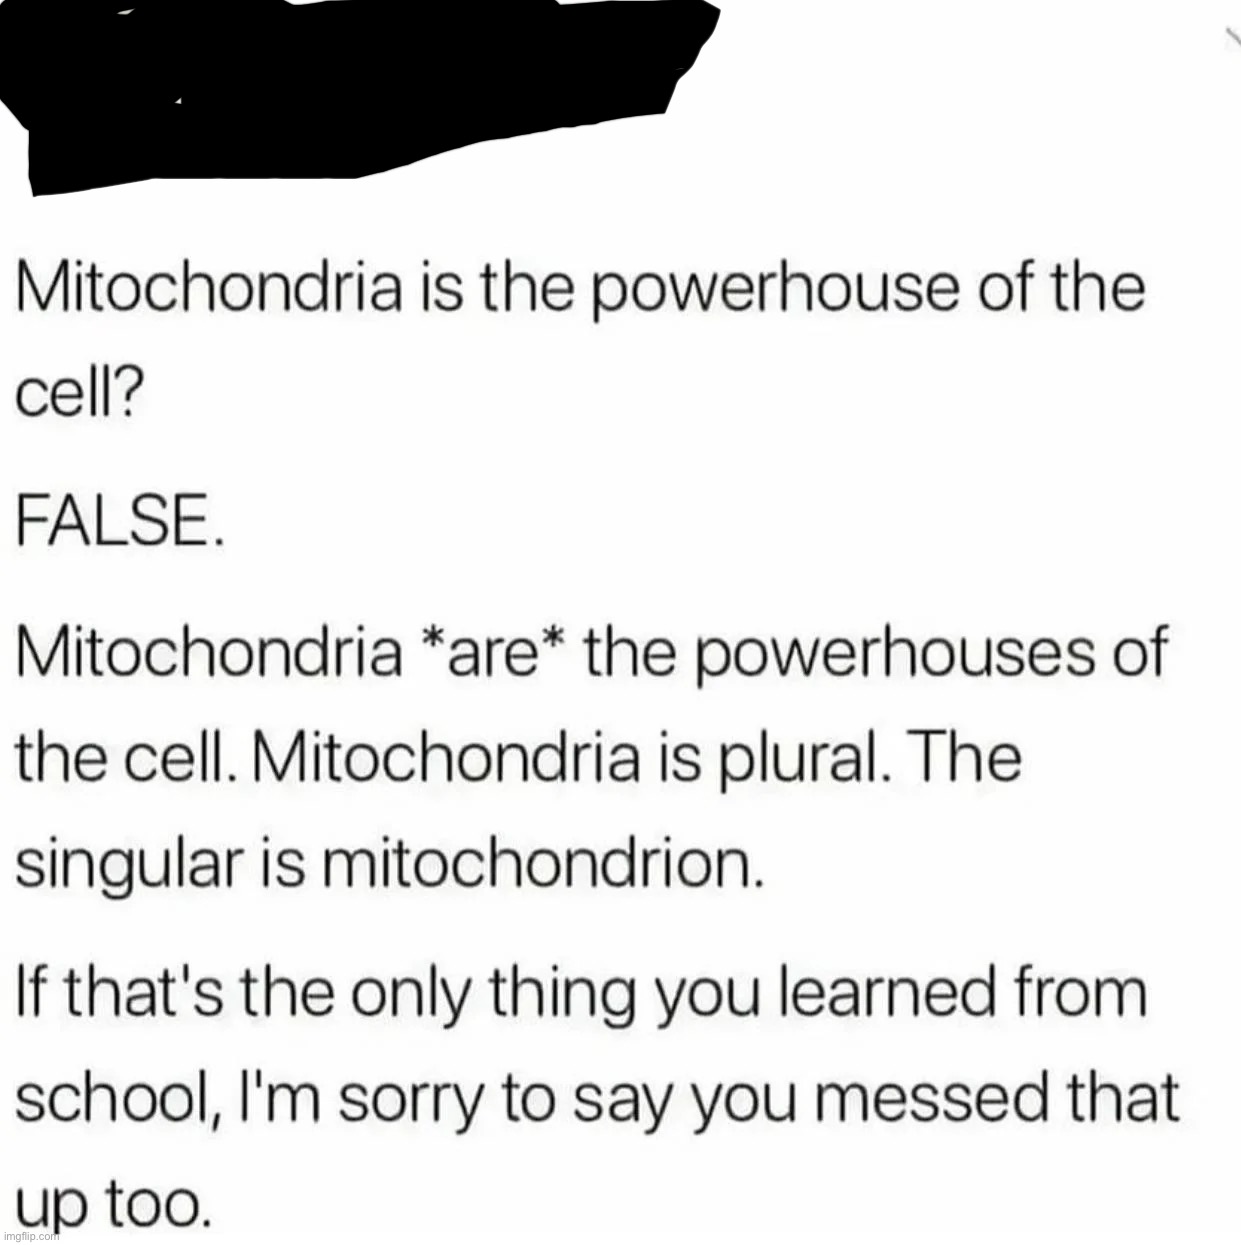 NOOOOOOOOOOOOOOOOOOOOOOOO | image tagged in mitochondria,mitochondria is the powerhouse of the cell,memes,repost,science | made w/ Imgflip meme maker